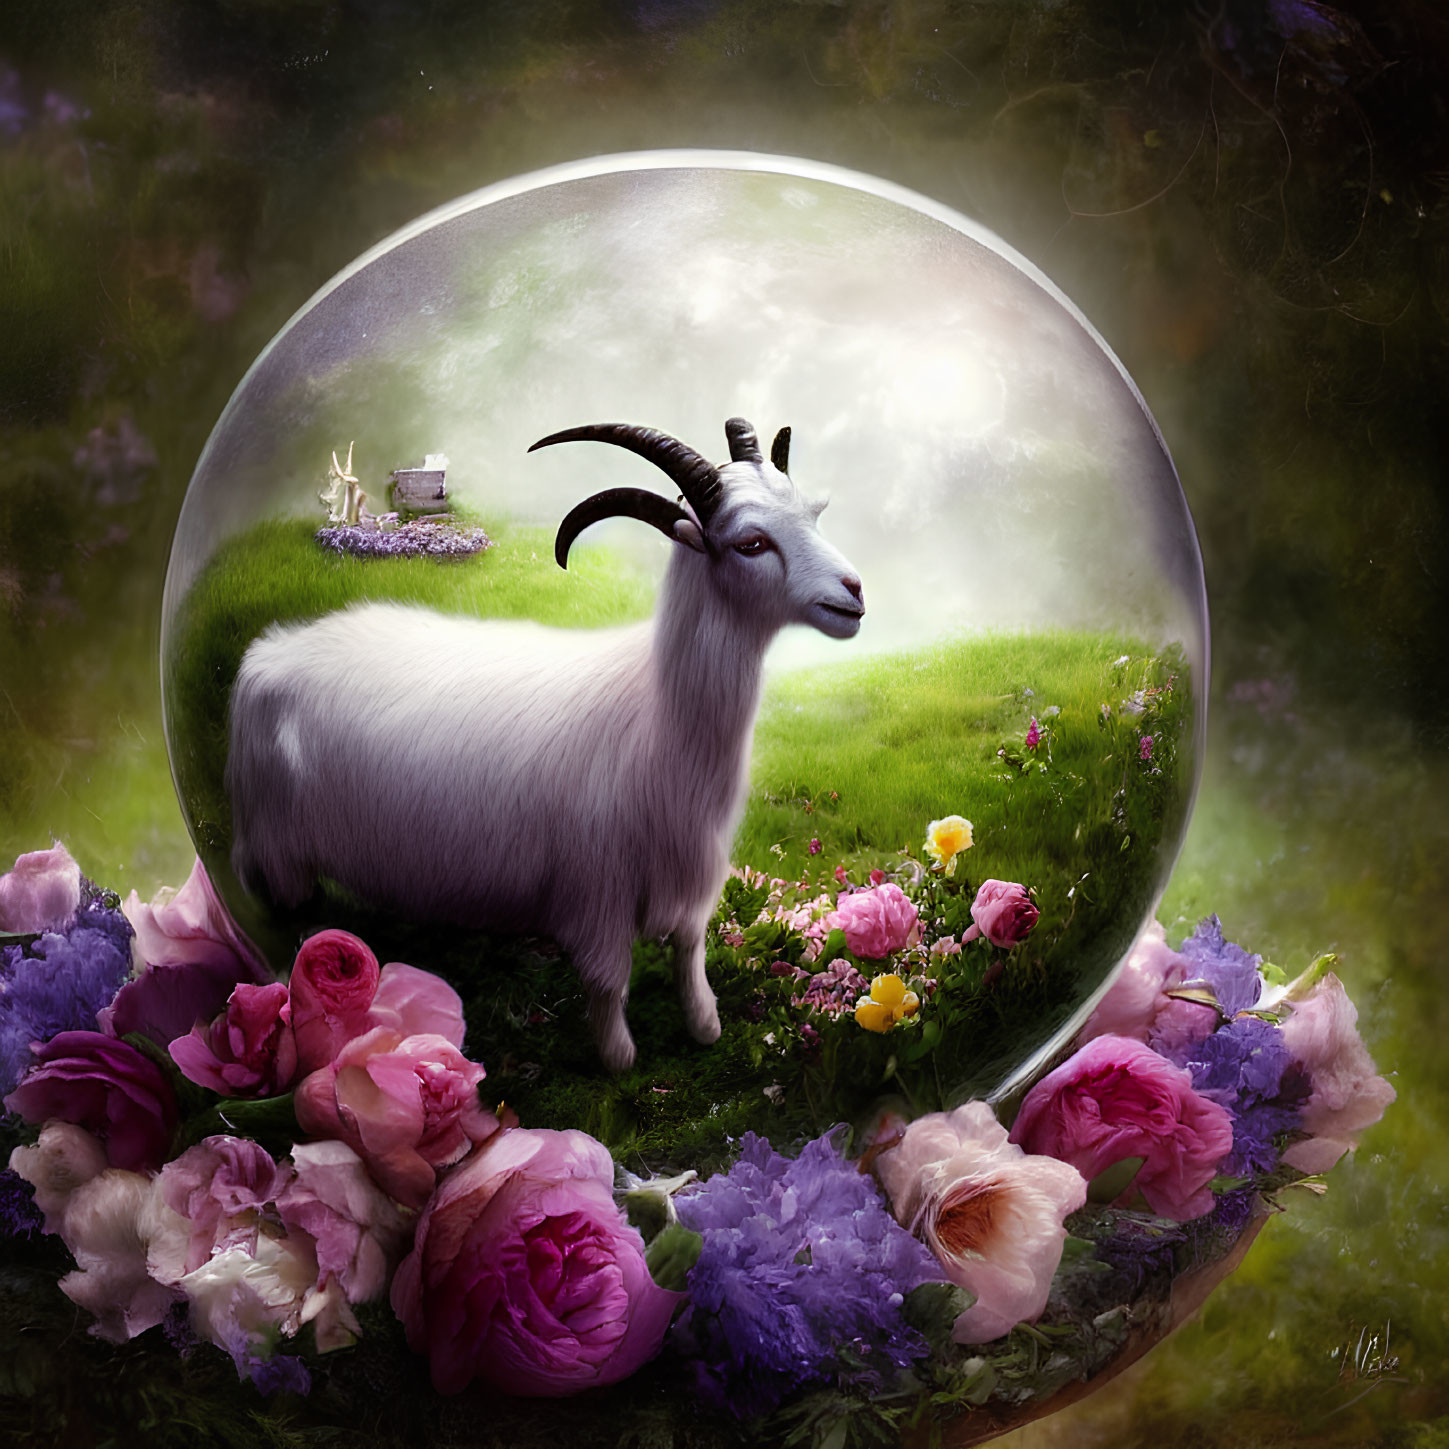 Surreal illustration: white goat in transparent bubble on meadow with roses